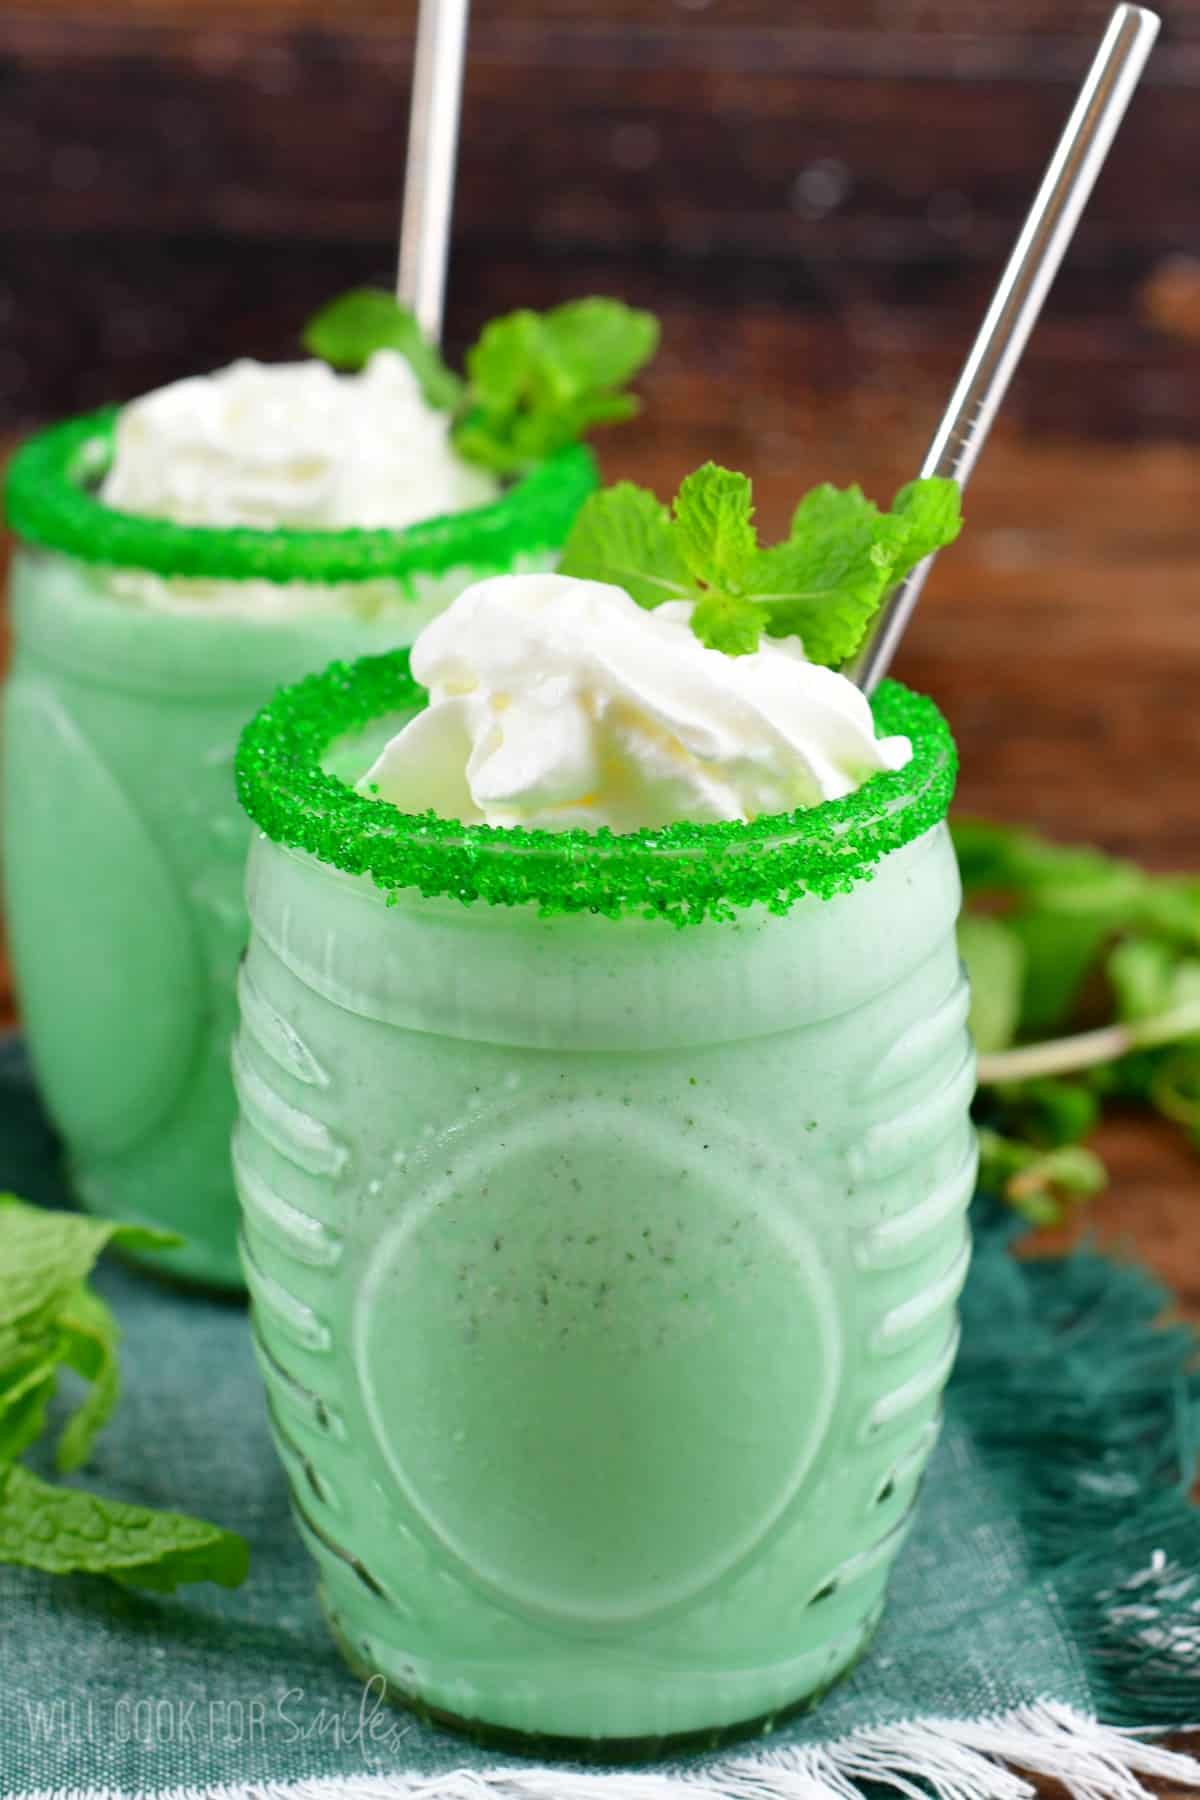 Green shamrock milkshake in a glass with whipped cream. sprinkles on rim of glass, and a metal straw.